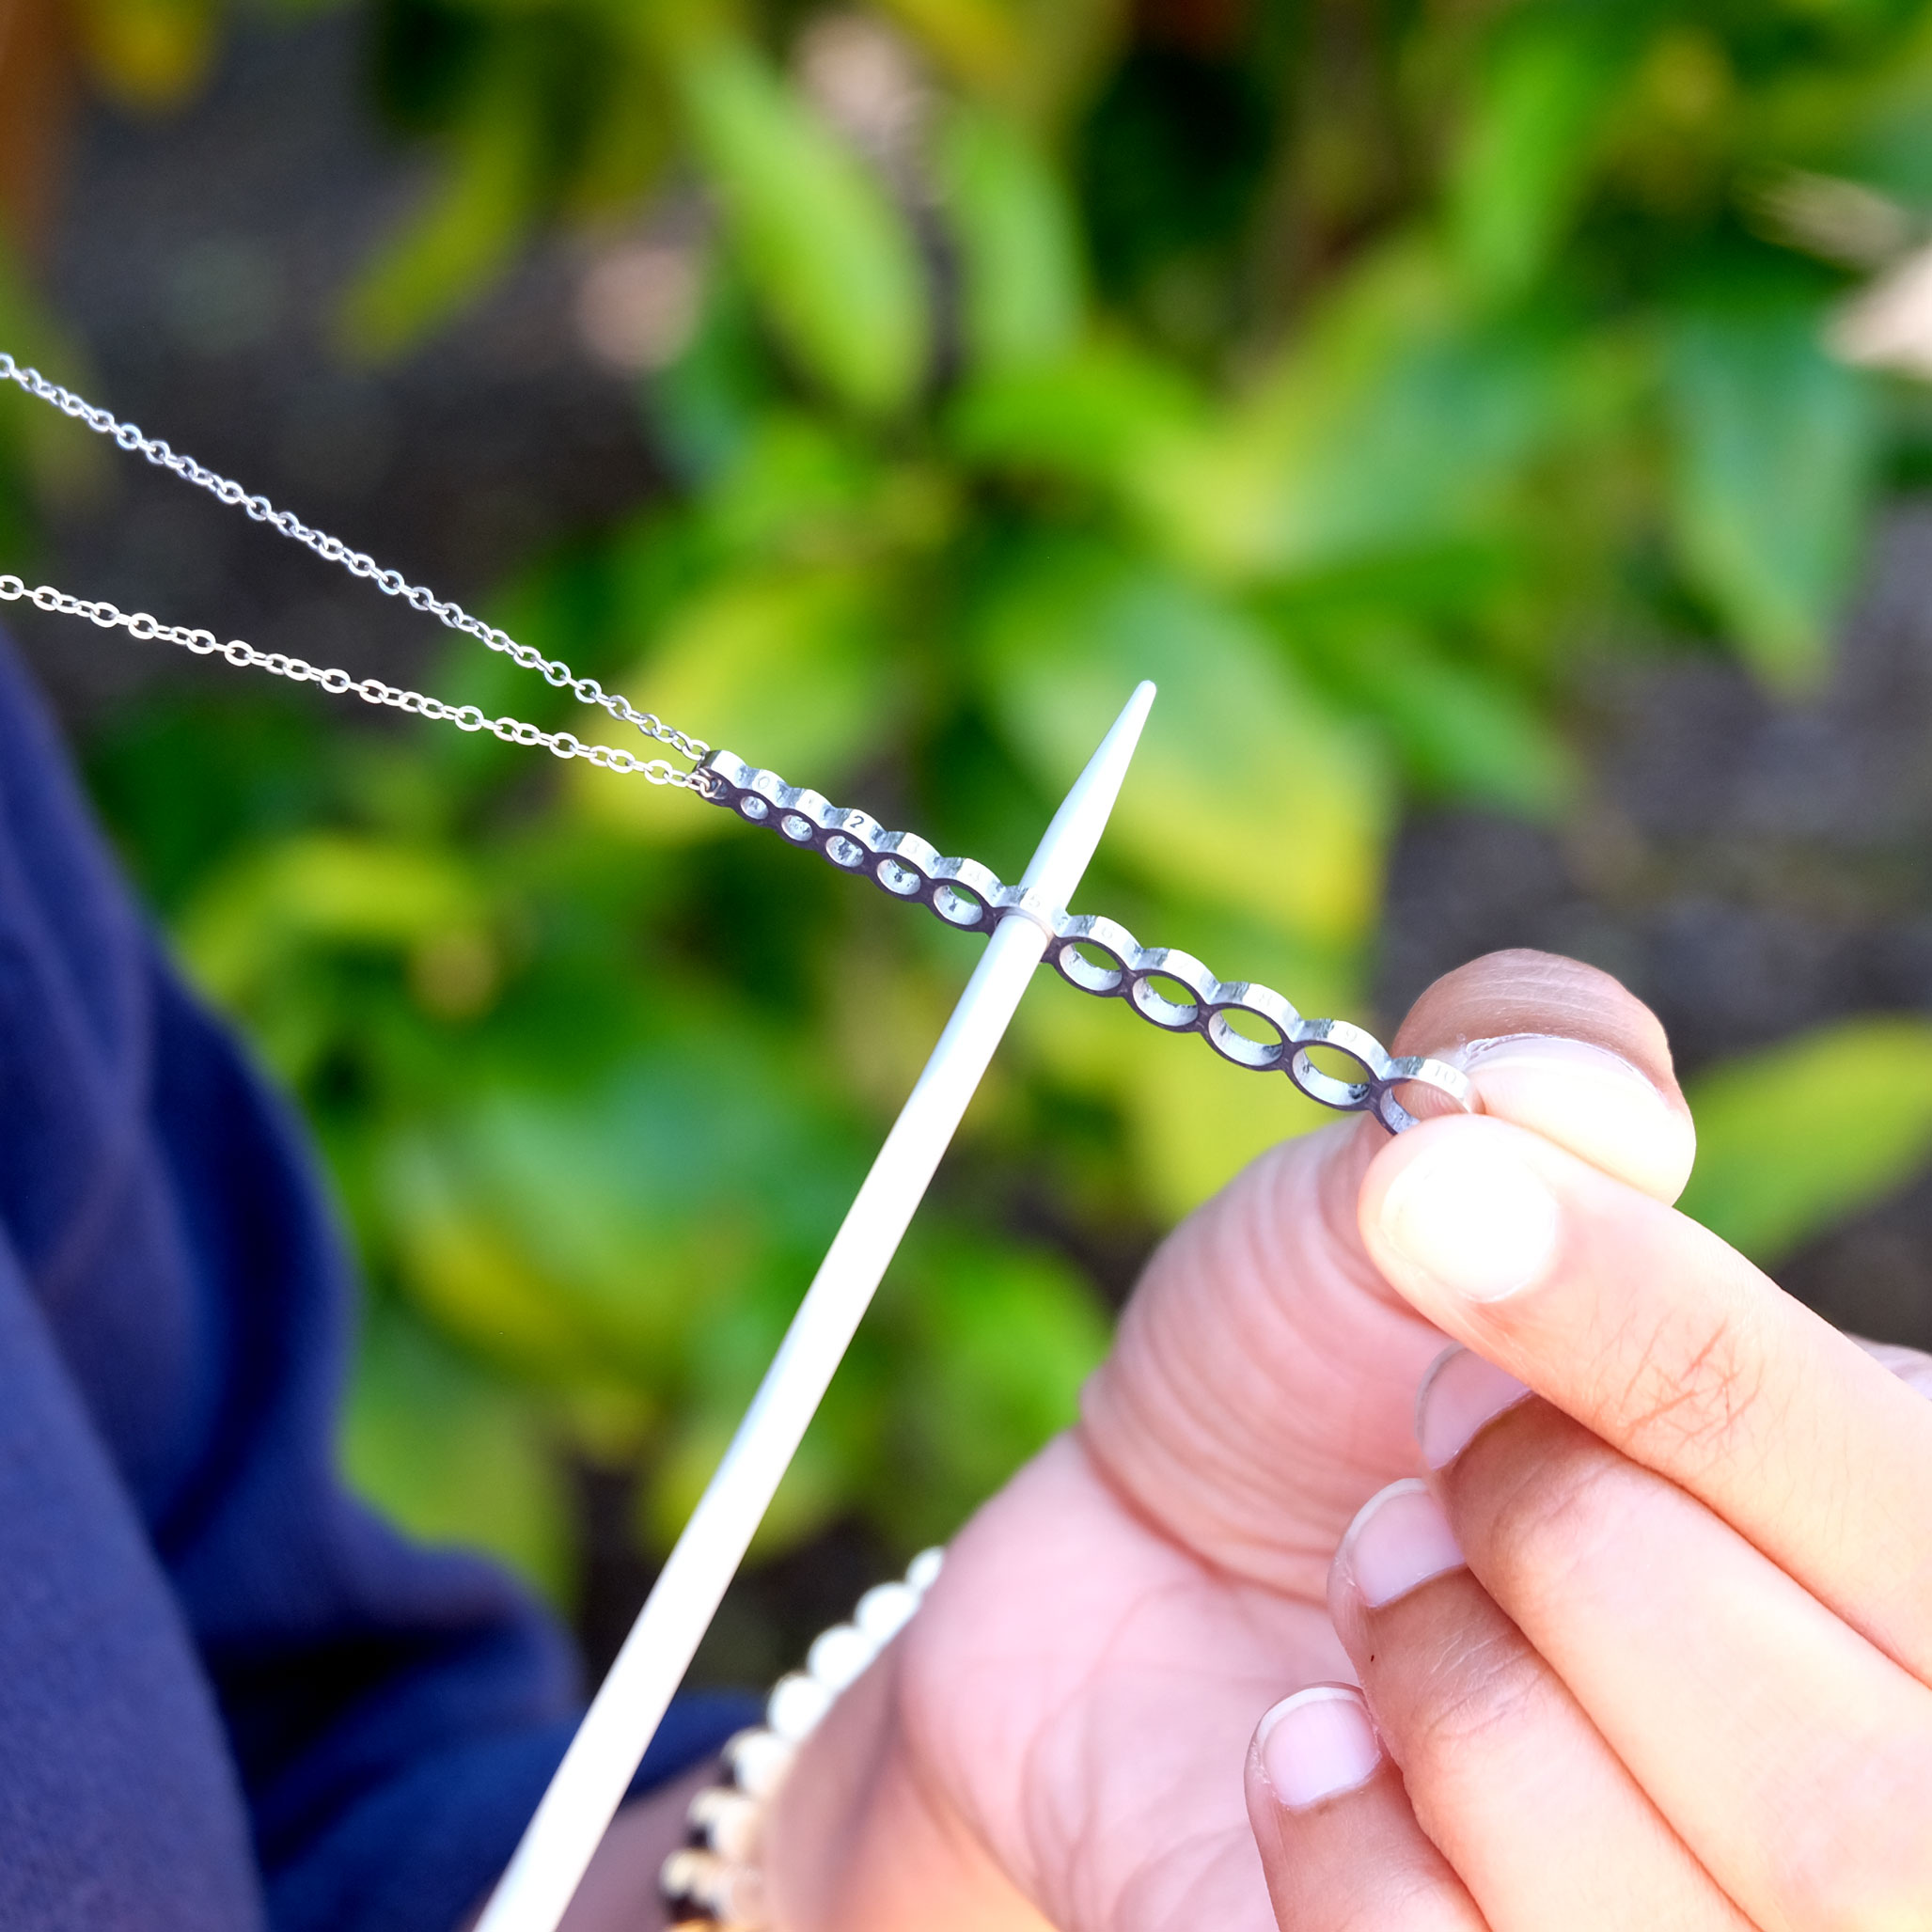 Necklace Length Guide | James Avery